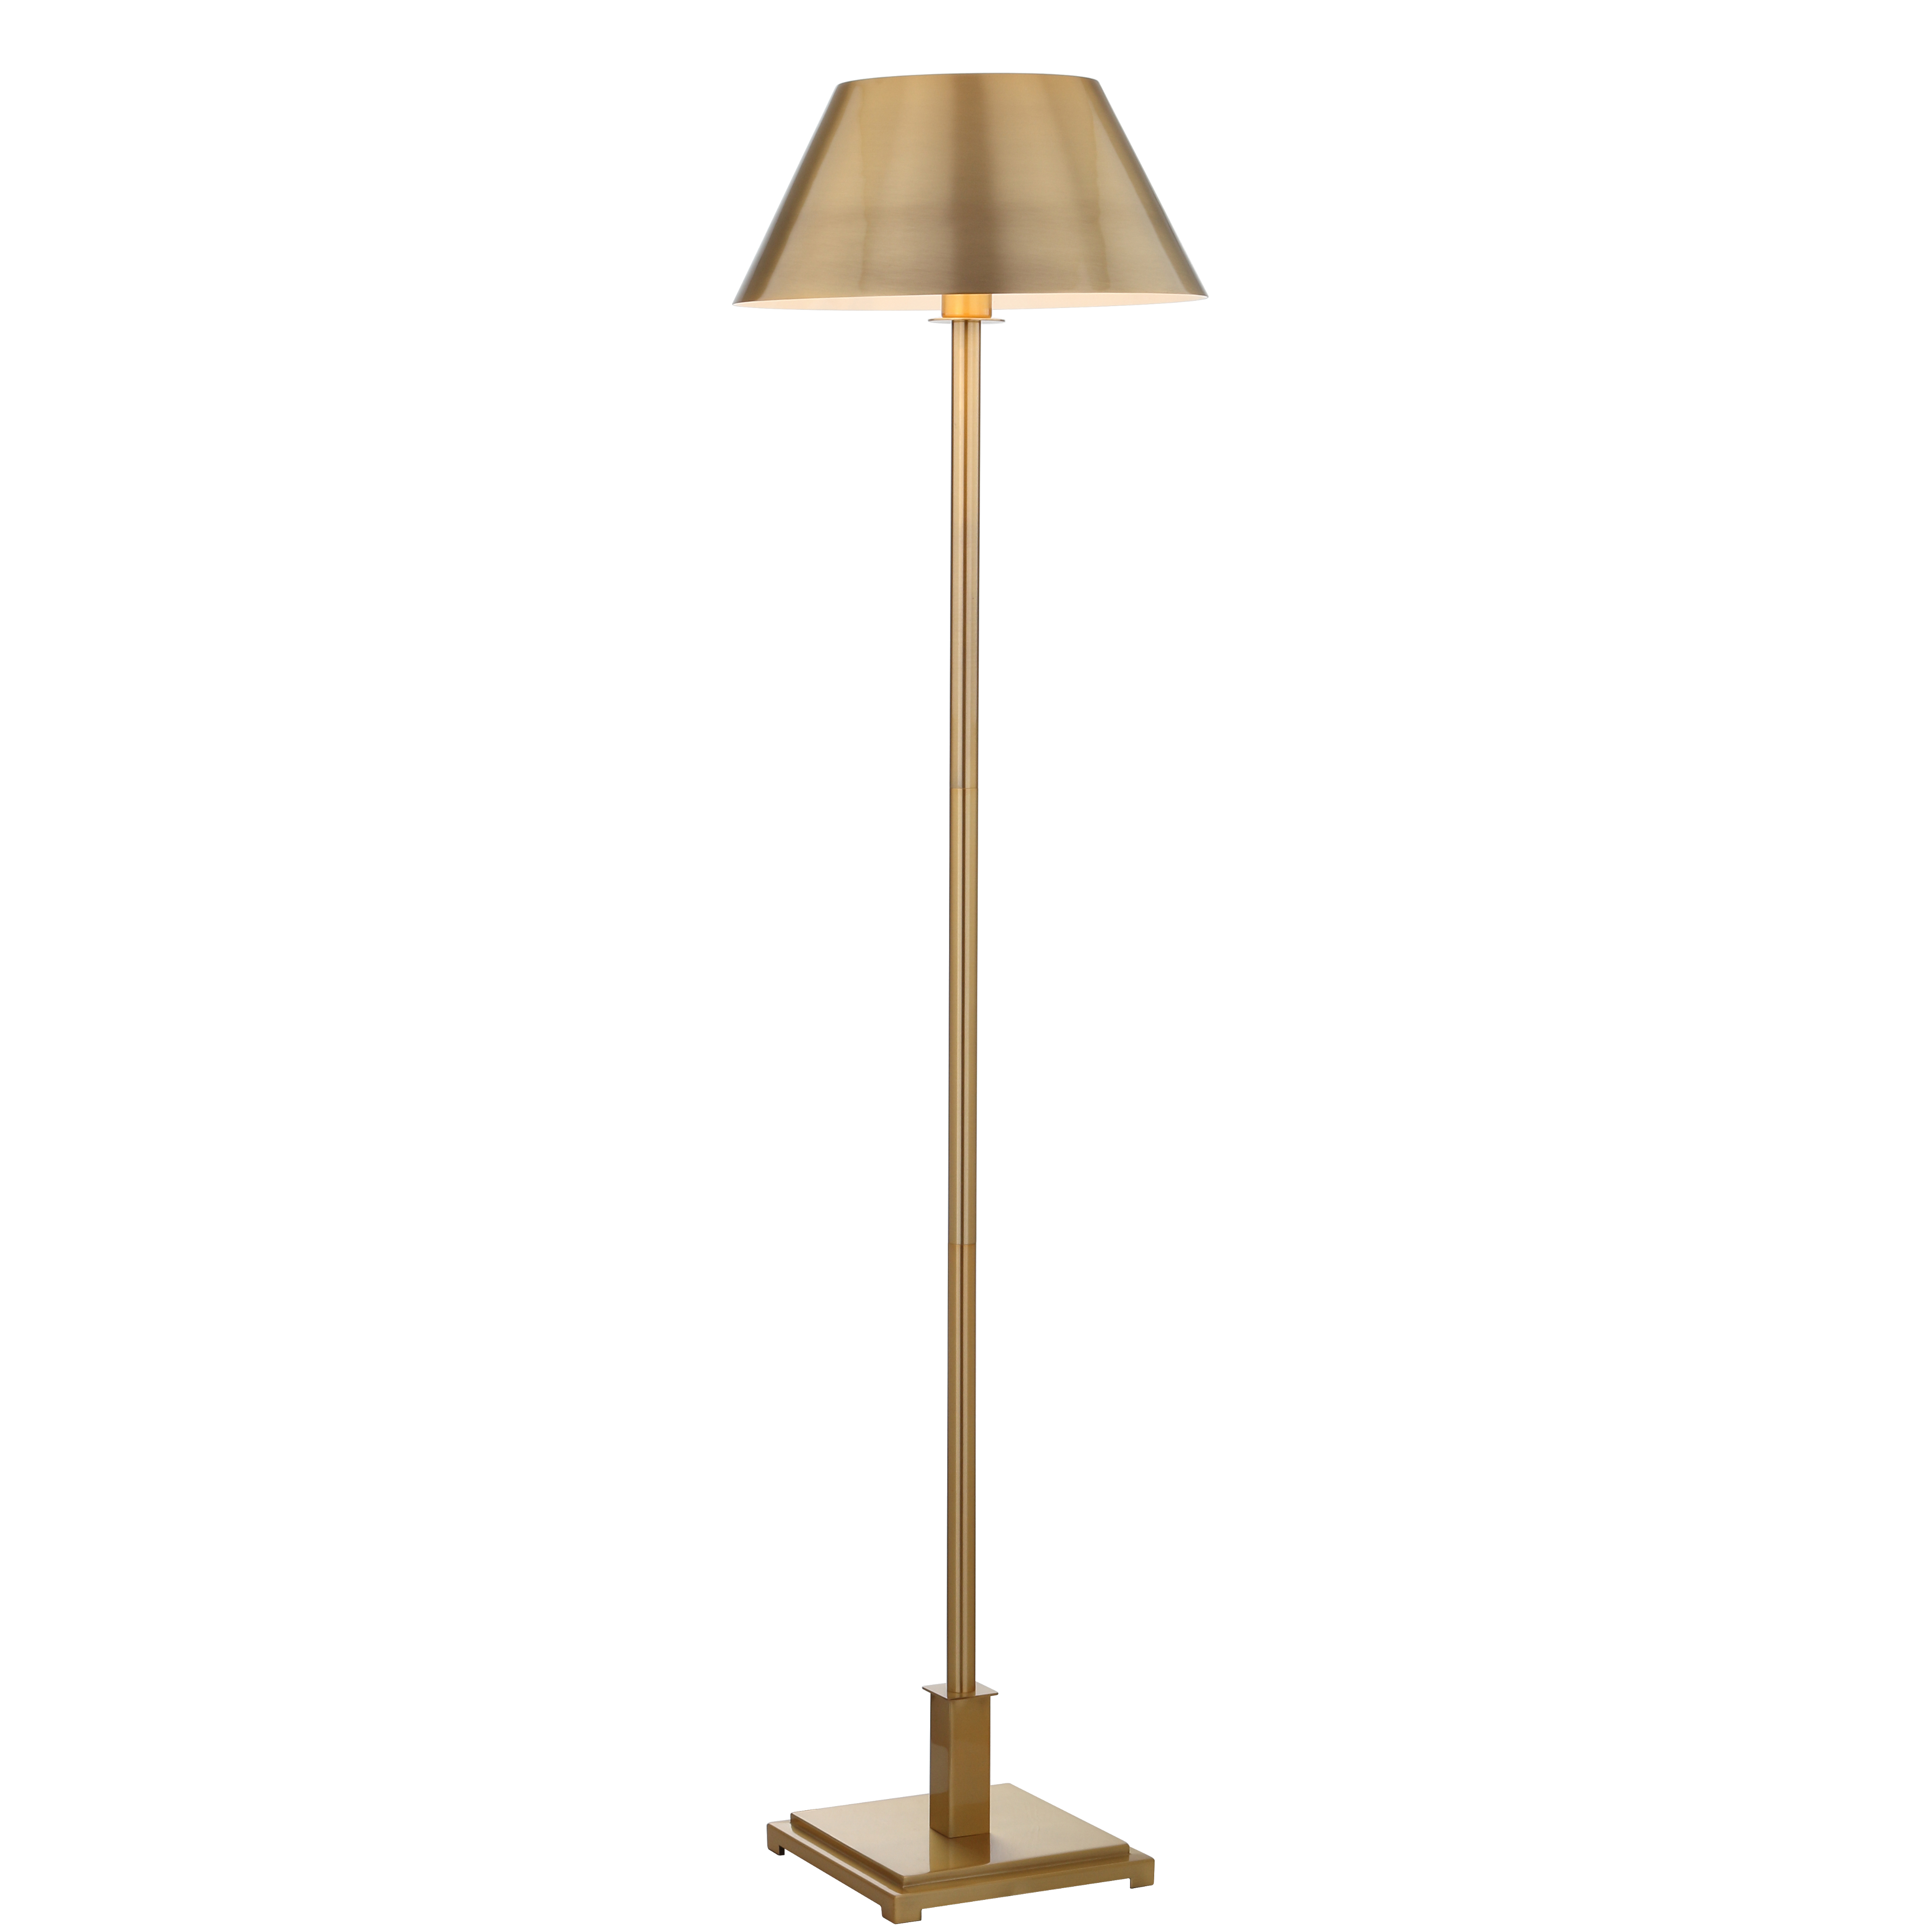 brass metal floor lamp with brass shade On sale for $296.00, discounted from $370.00